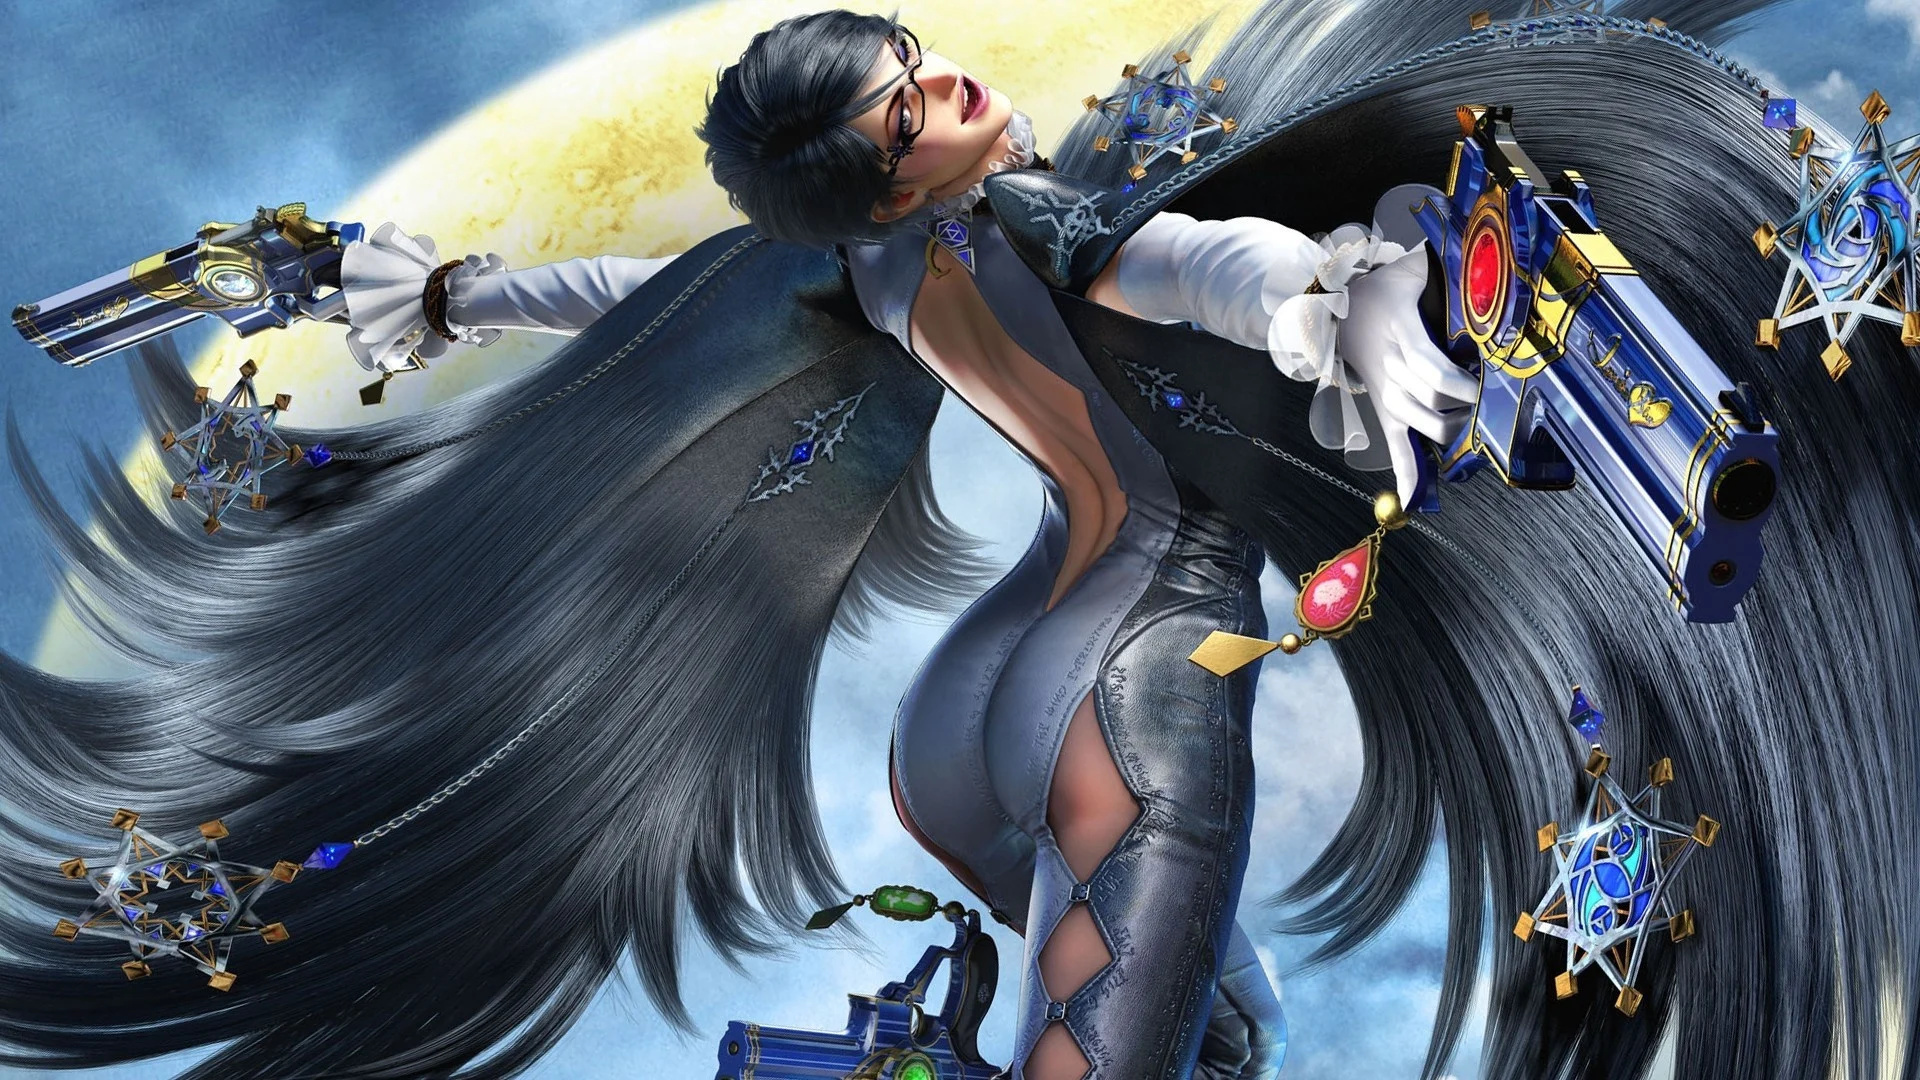 Bayonetta 3: Witch Time, Torture Attacks, Wicked Weaves, Madama Butterfly. 1920x1080 Full HD Wallpaper.